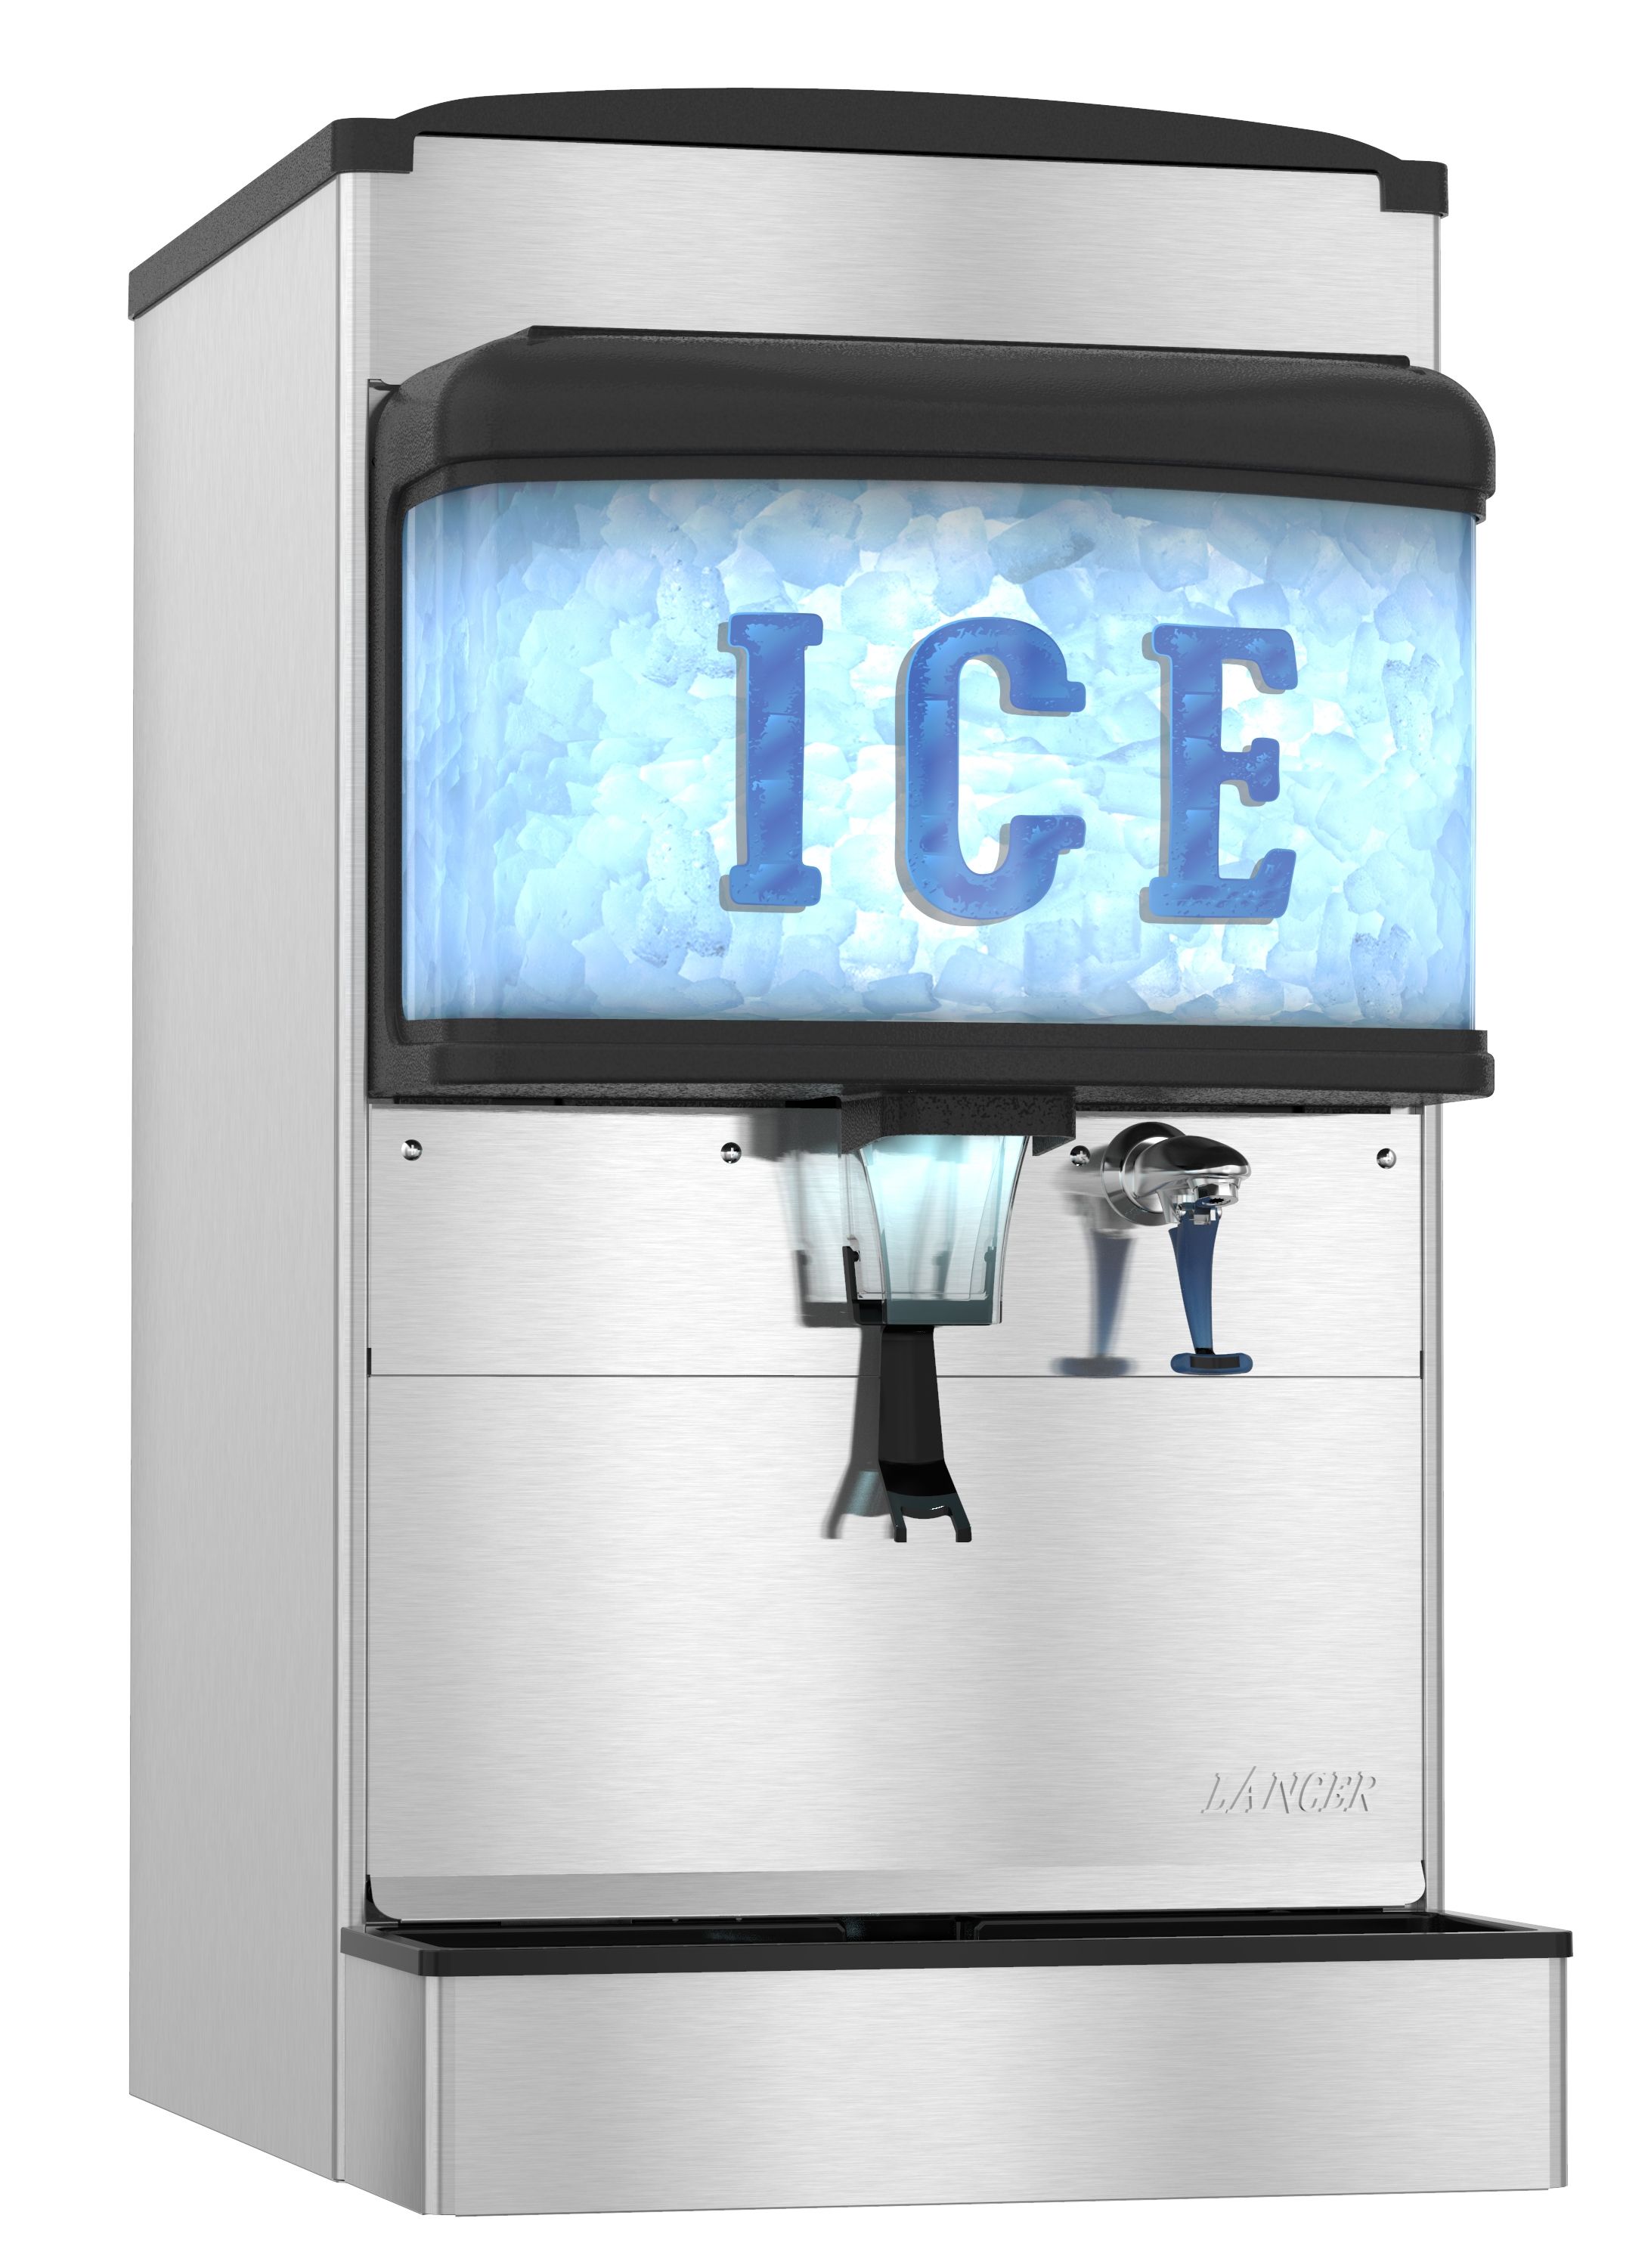 Hoshizaki Dm 4420n Cubelet Ice Maker 22 Wide Counter Top Ice And